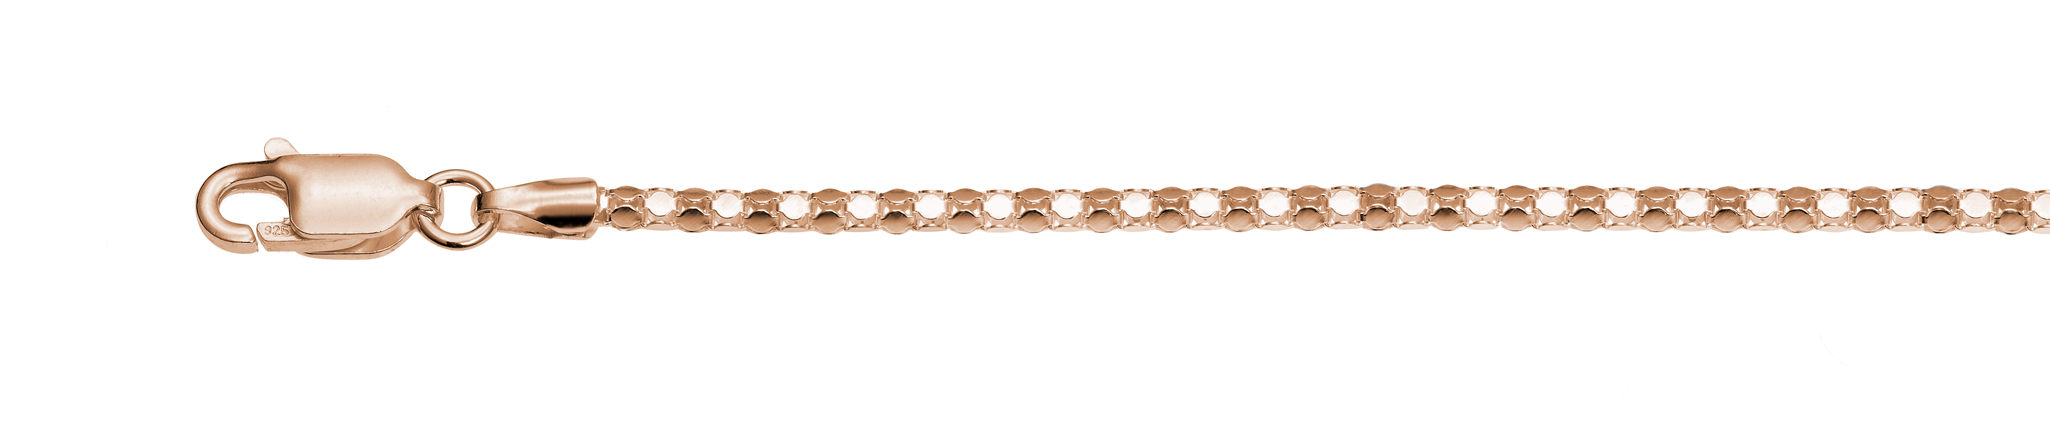 Ref.: 91418 - Rose gold plated flat popcorn - Wide 1.8